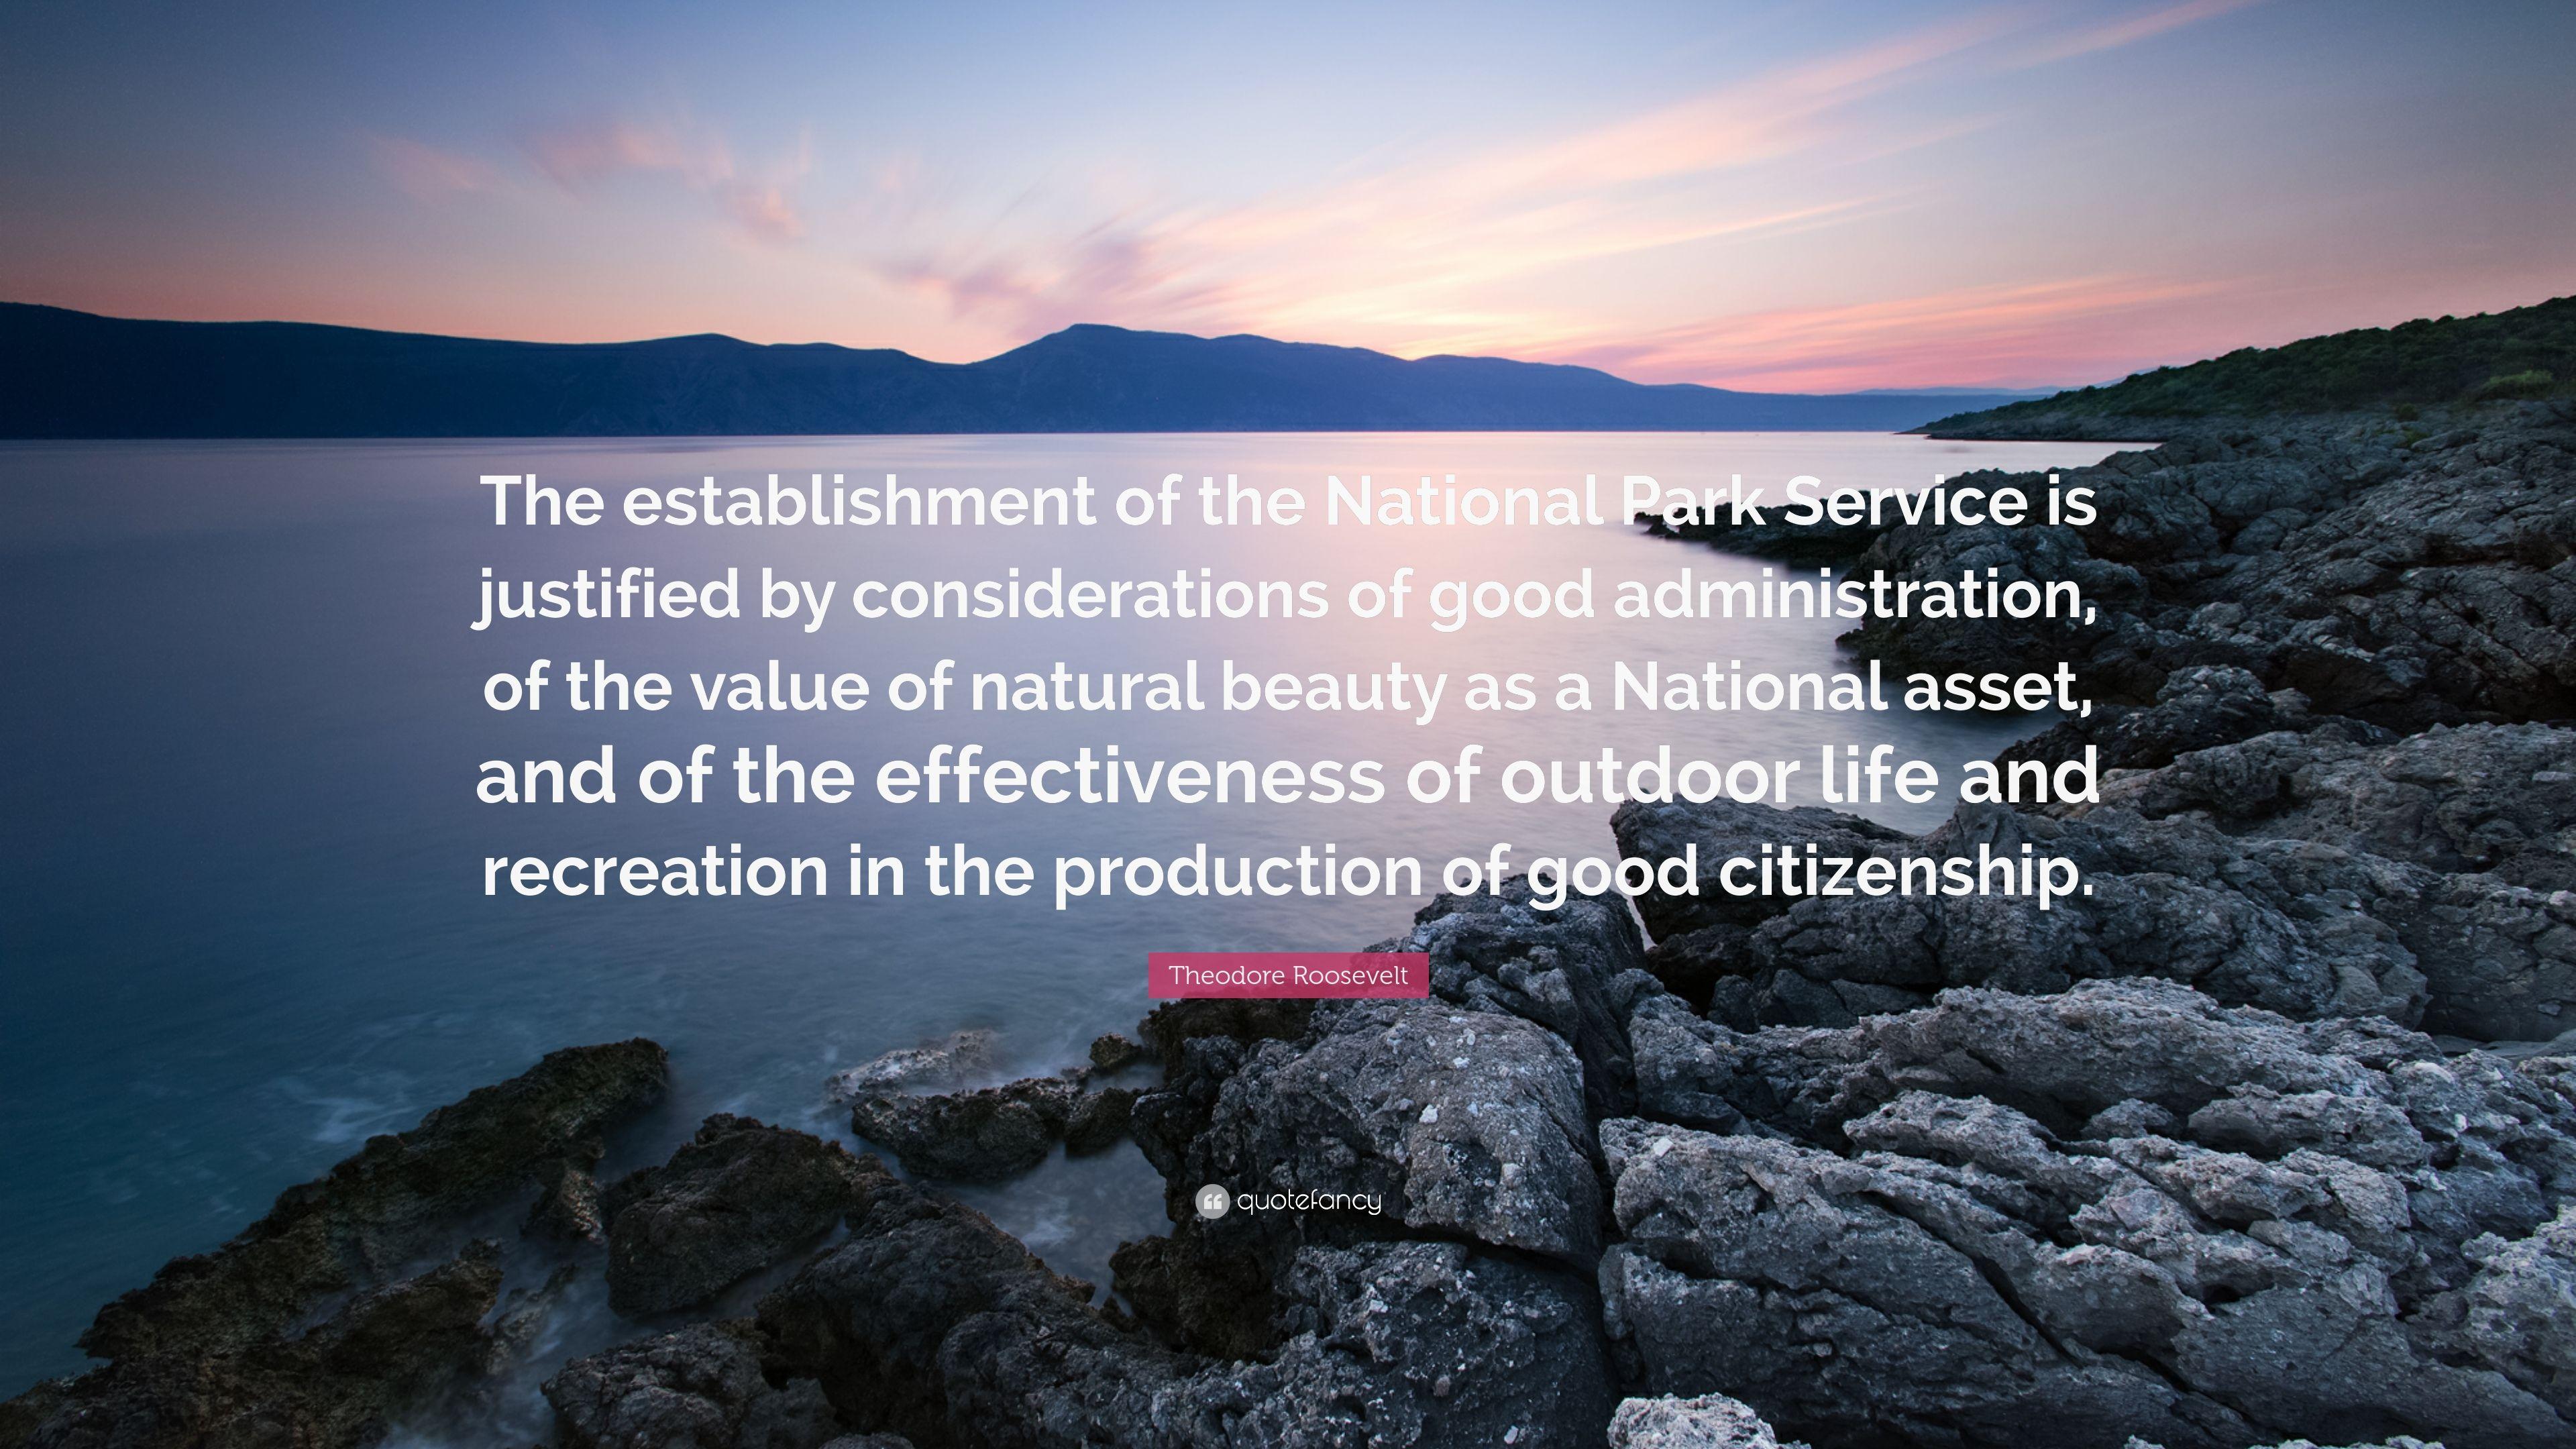 Theodore Roosevelt Quote: “The establishment of the National Park